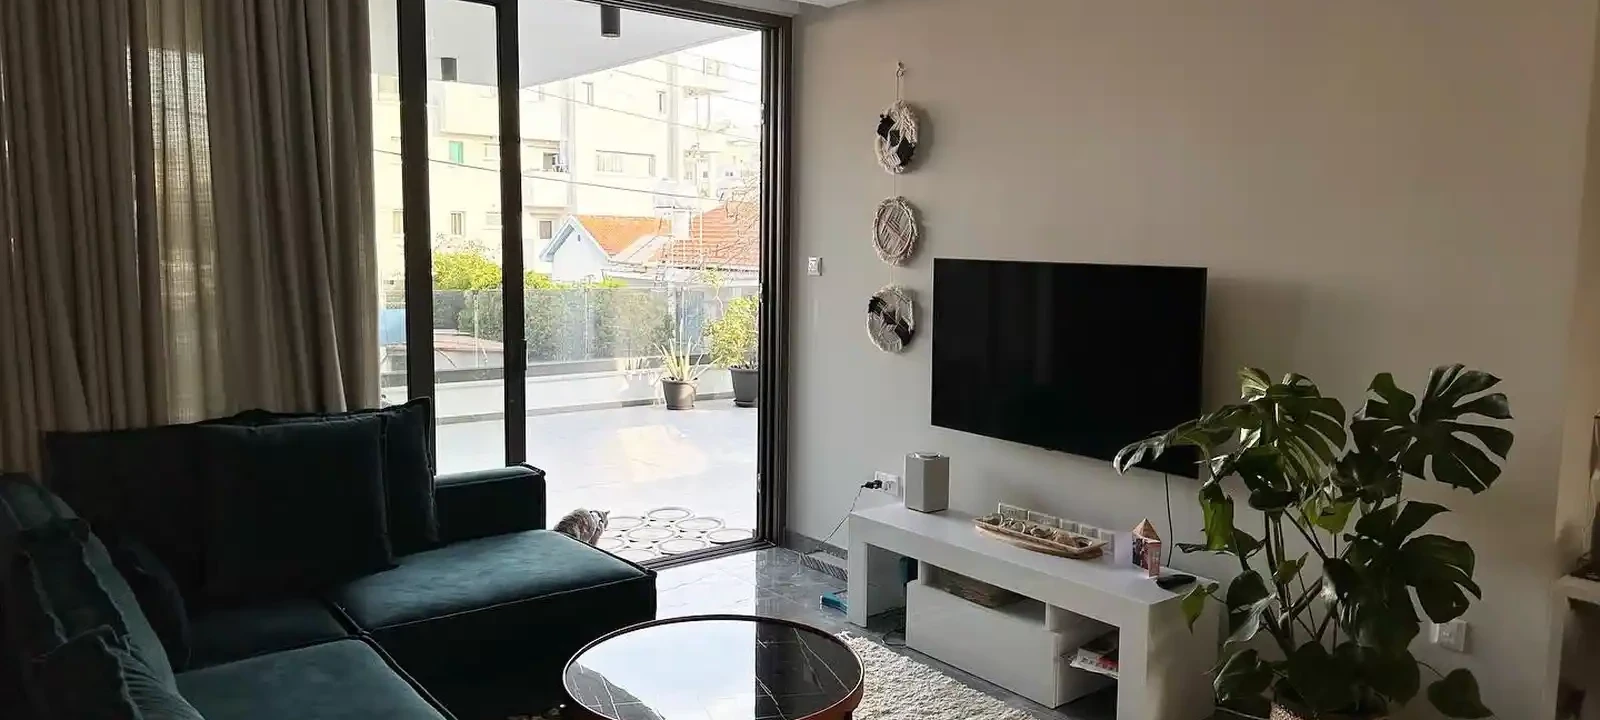 2-bedroom apartment to rent €2.350, image 1